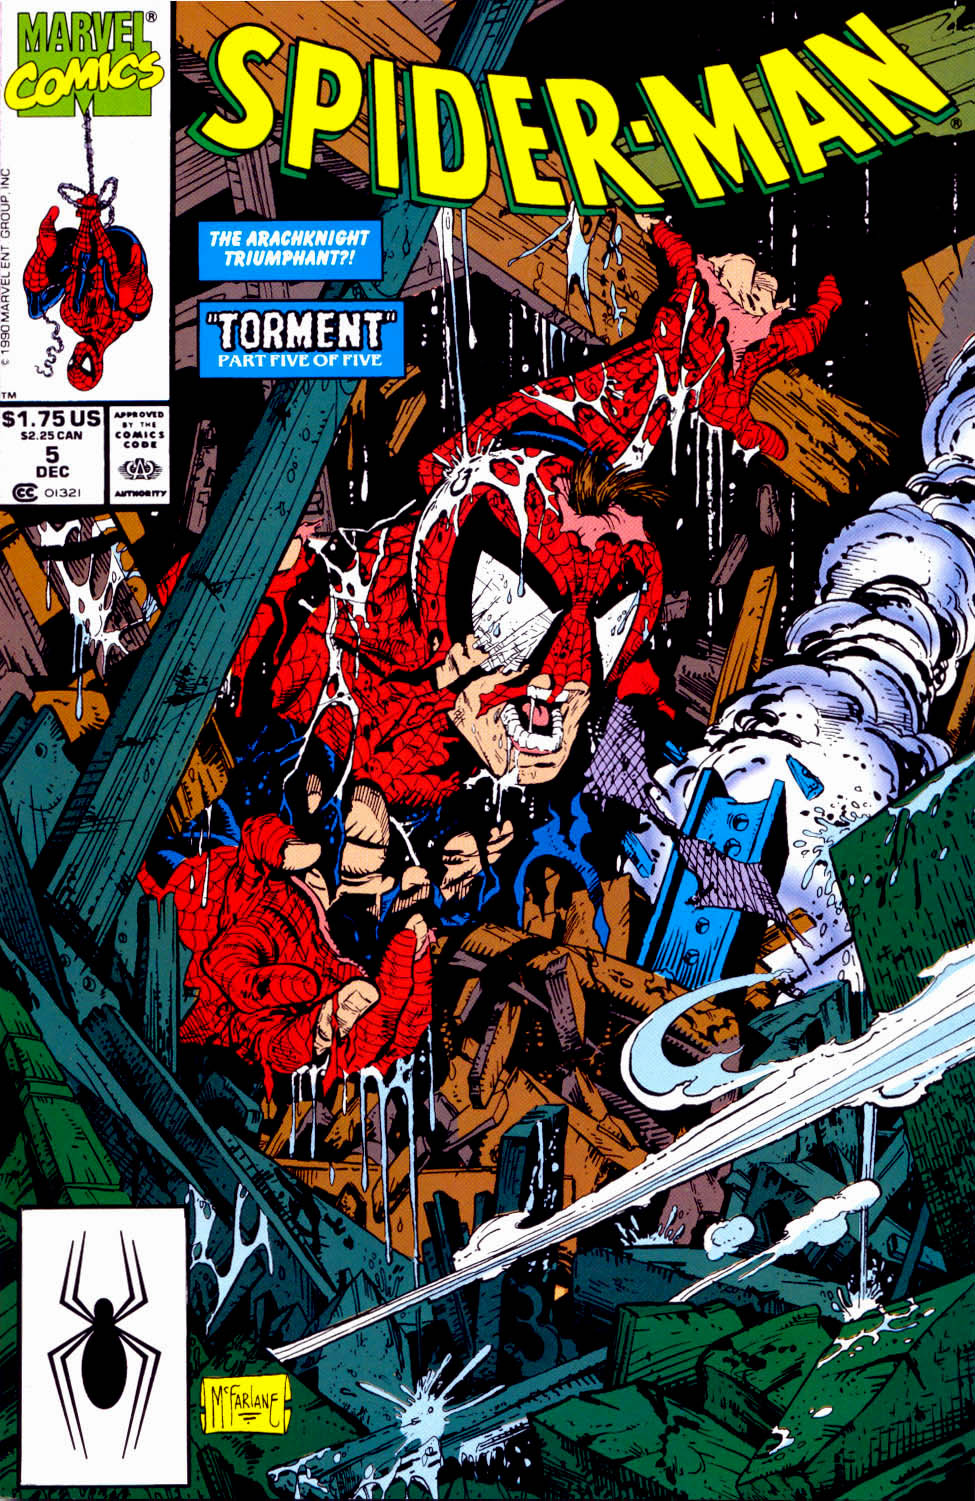 Spider-Man (1990) issue 5 - Torment Part 5 - Page 1